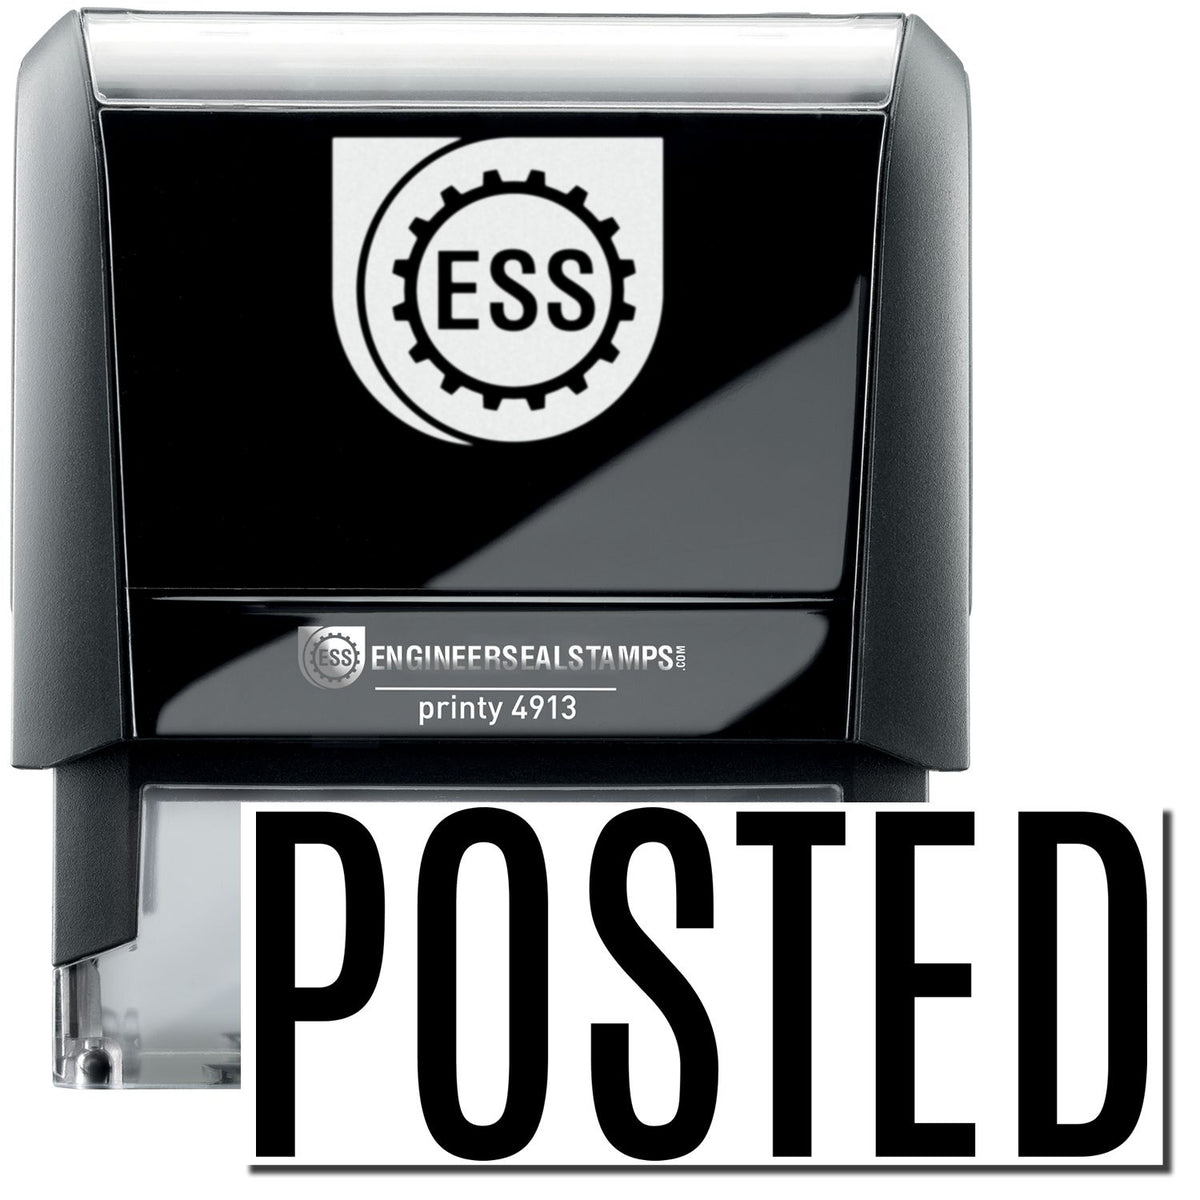 A self-inking stamp with a stamped image showing how the text &quot;POSTED&quot; in a large narrow font is displayed by it after stamping.